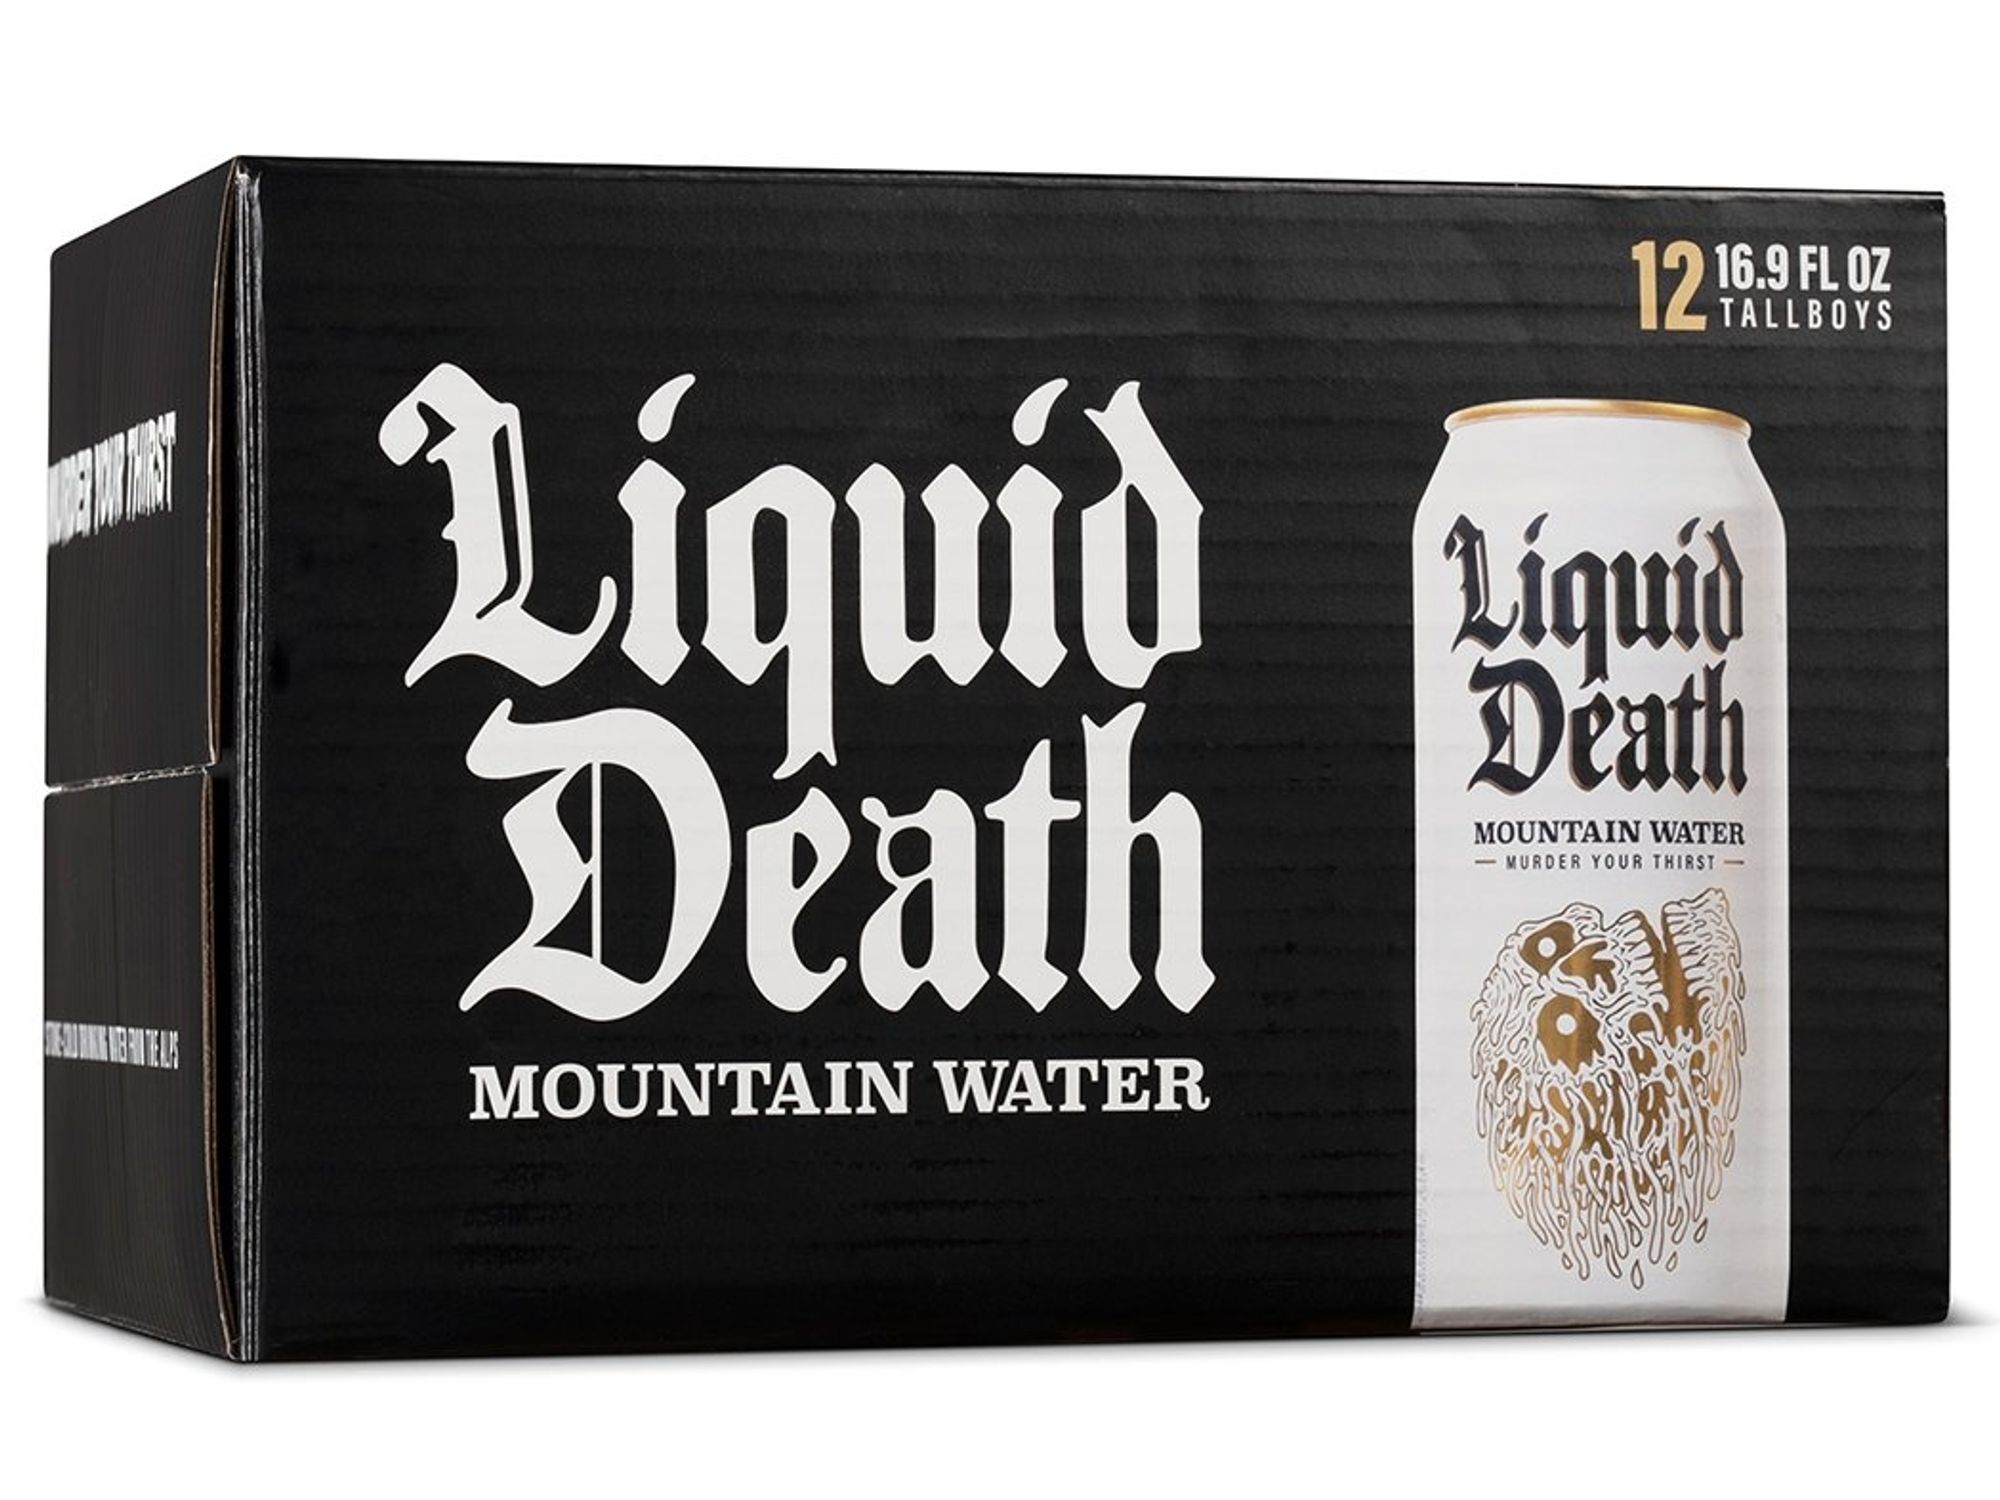 'Fire Your Marketing Guy'; Liquid Death Channels The Rage Into a Heavy Metal Album